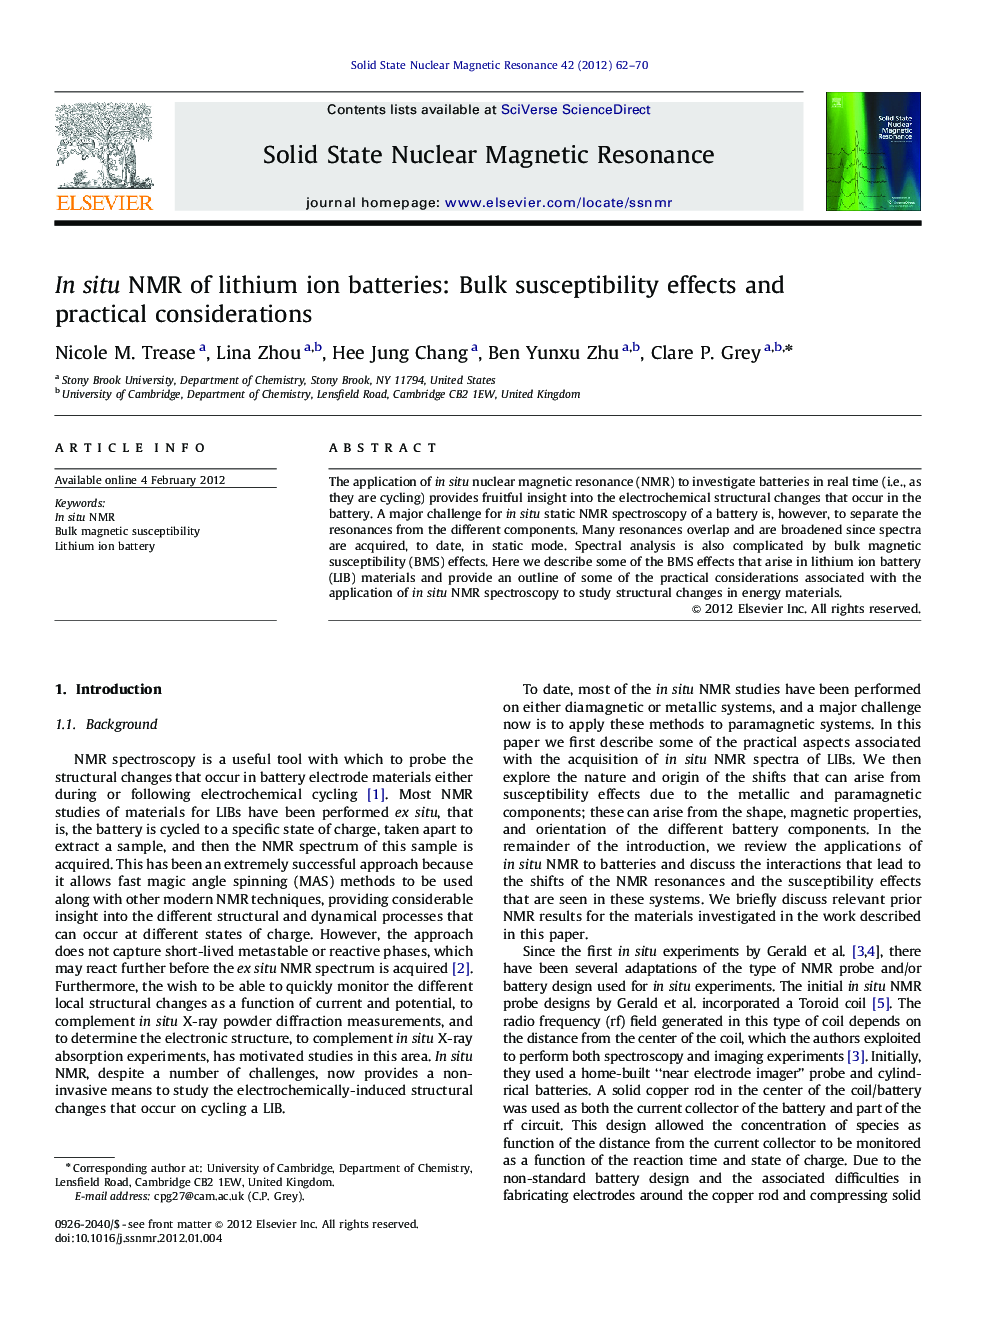 In situ NMR of lithium ion batteries: Bulk susceptibility effects and practical considerations